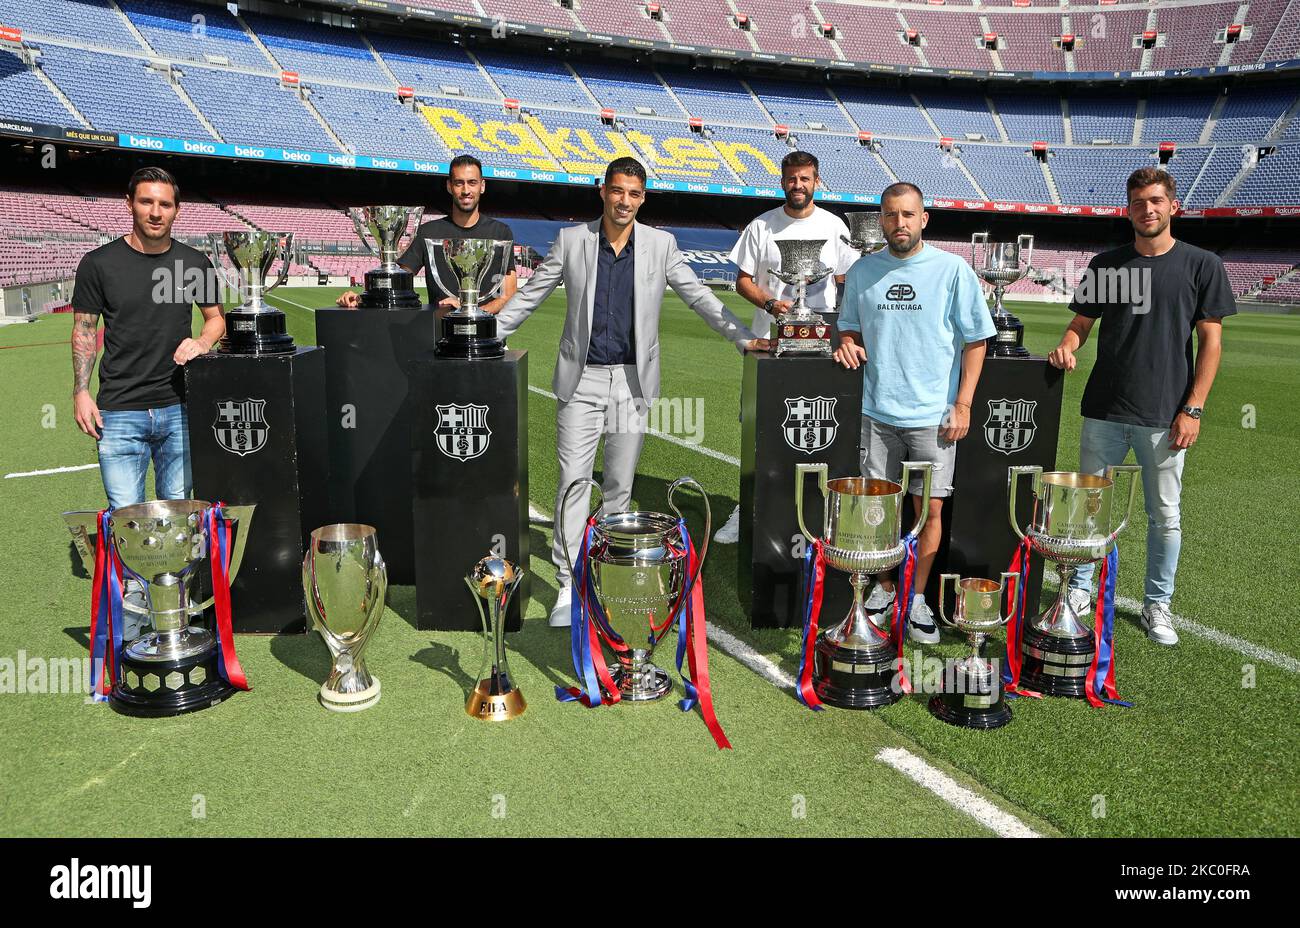 Luis Suarez, whith Leo Messi, Jordi Alba, Sergio Busquets, Sergi Roberto and Gerard Pique at the Camp Nou stadium with all the trophies he has won during his six seasons at FC Barcelona on 24th September 2020, in Barcelona, Spain. (Photo by Urbanandsport/NurPhoto) Stock Photo